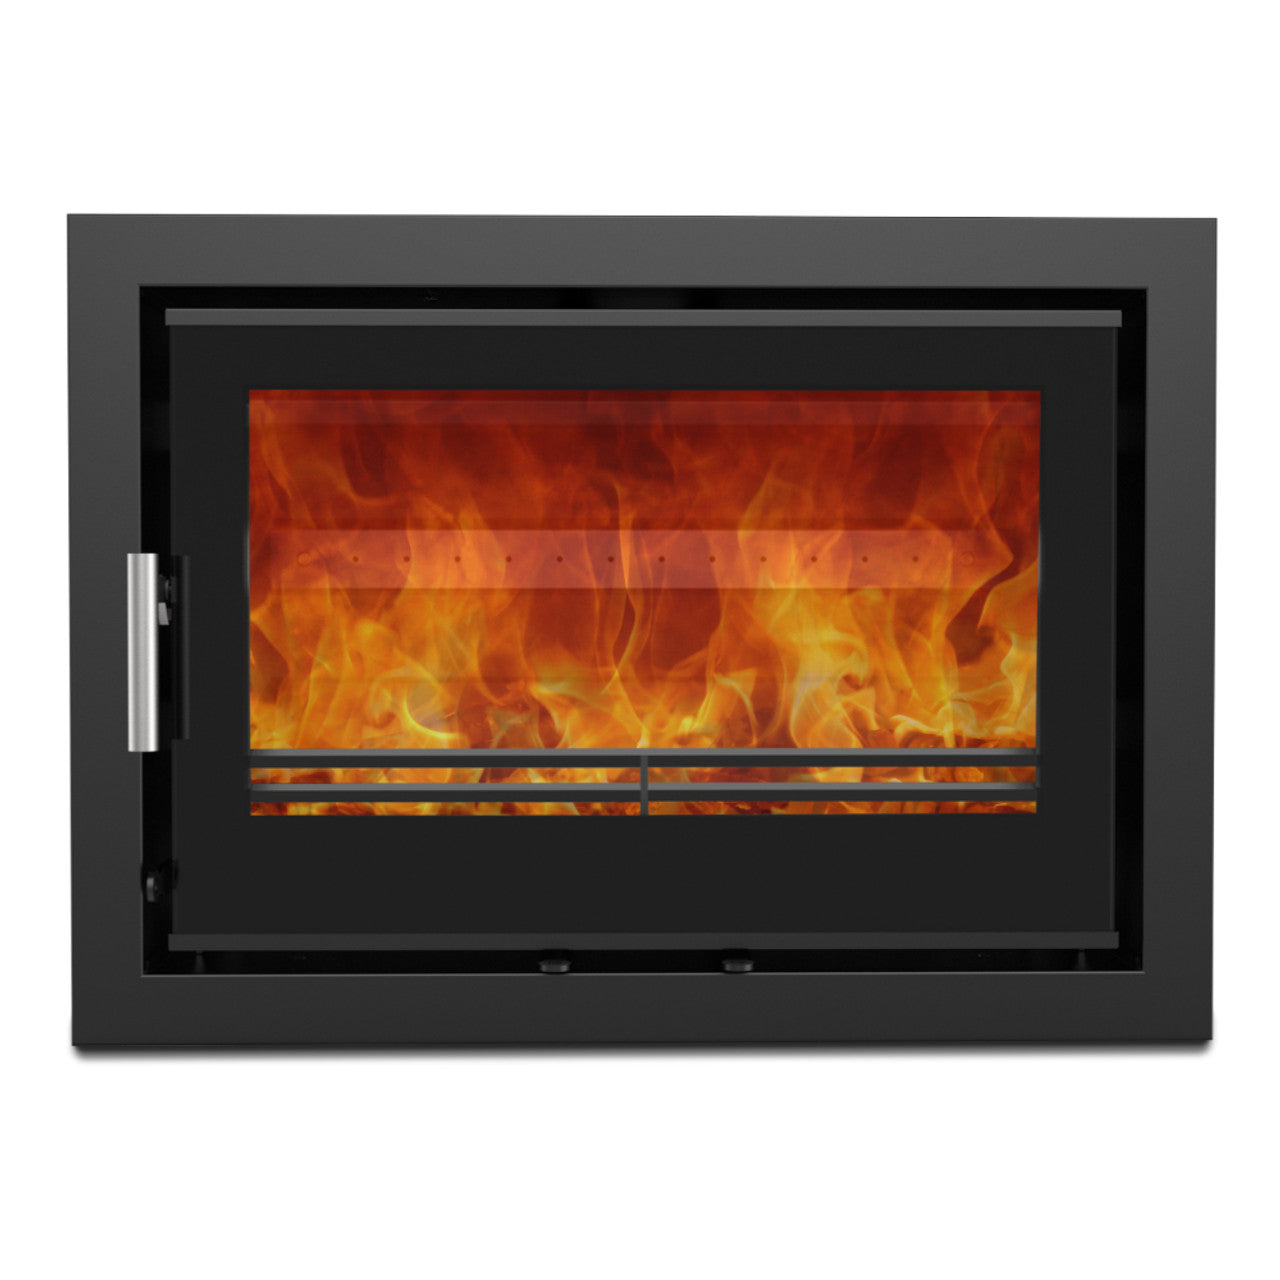 The Lovell C700 multifuel inset stove 9kW ecodesign ready